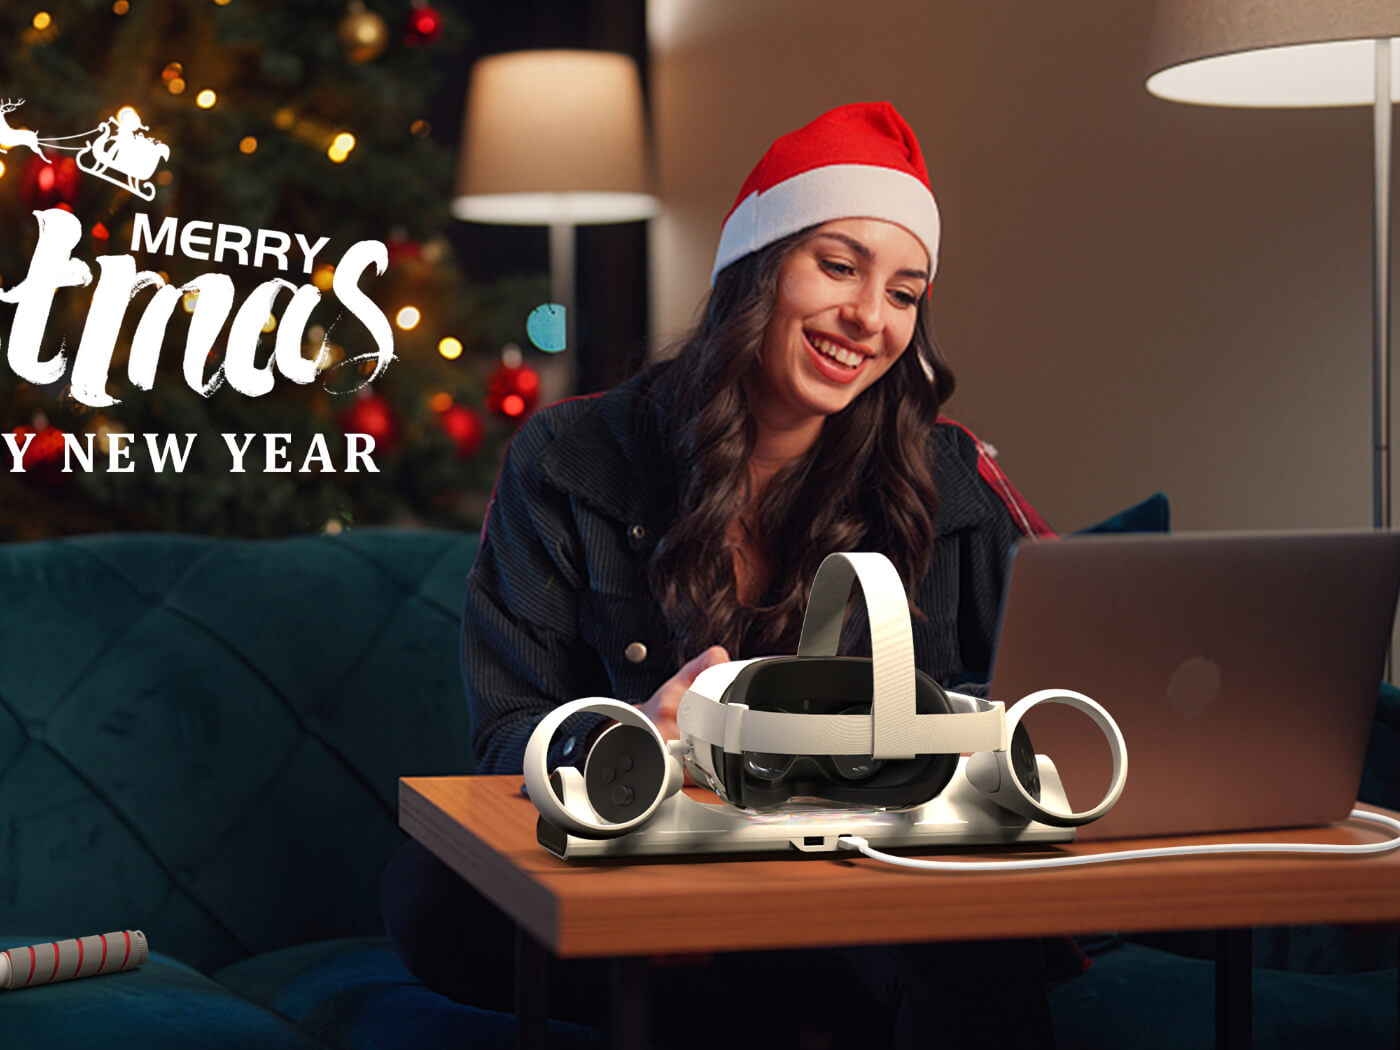 Best VR games for Christmas holiday when family and friends are gathering